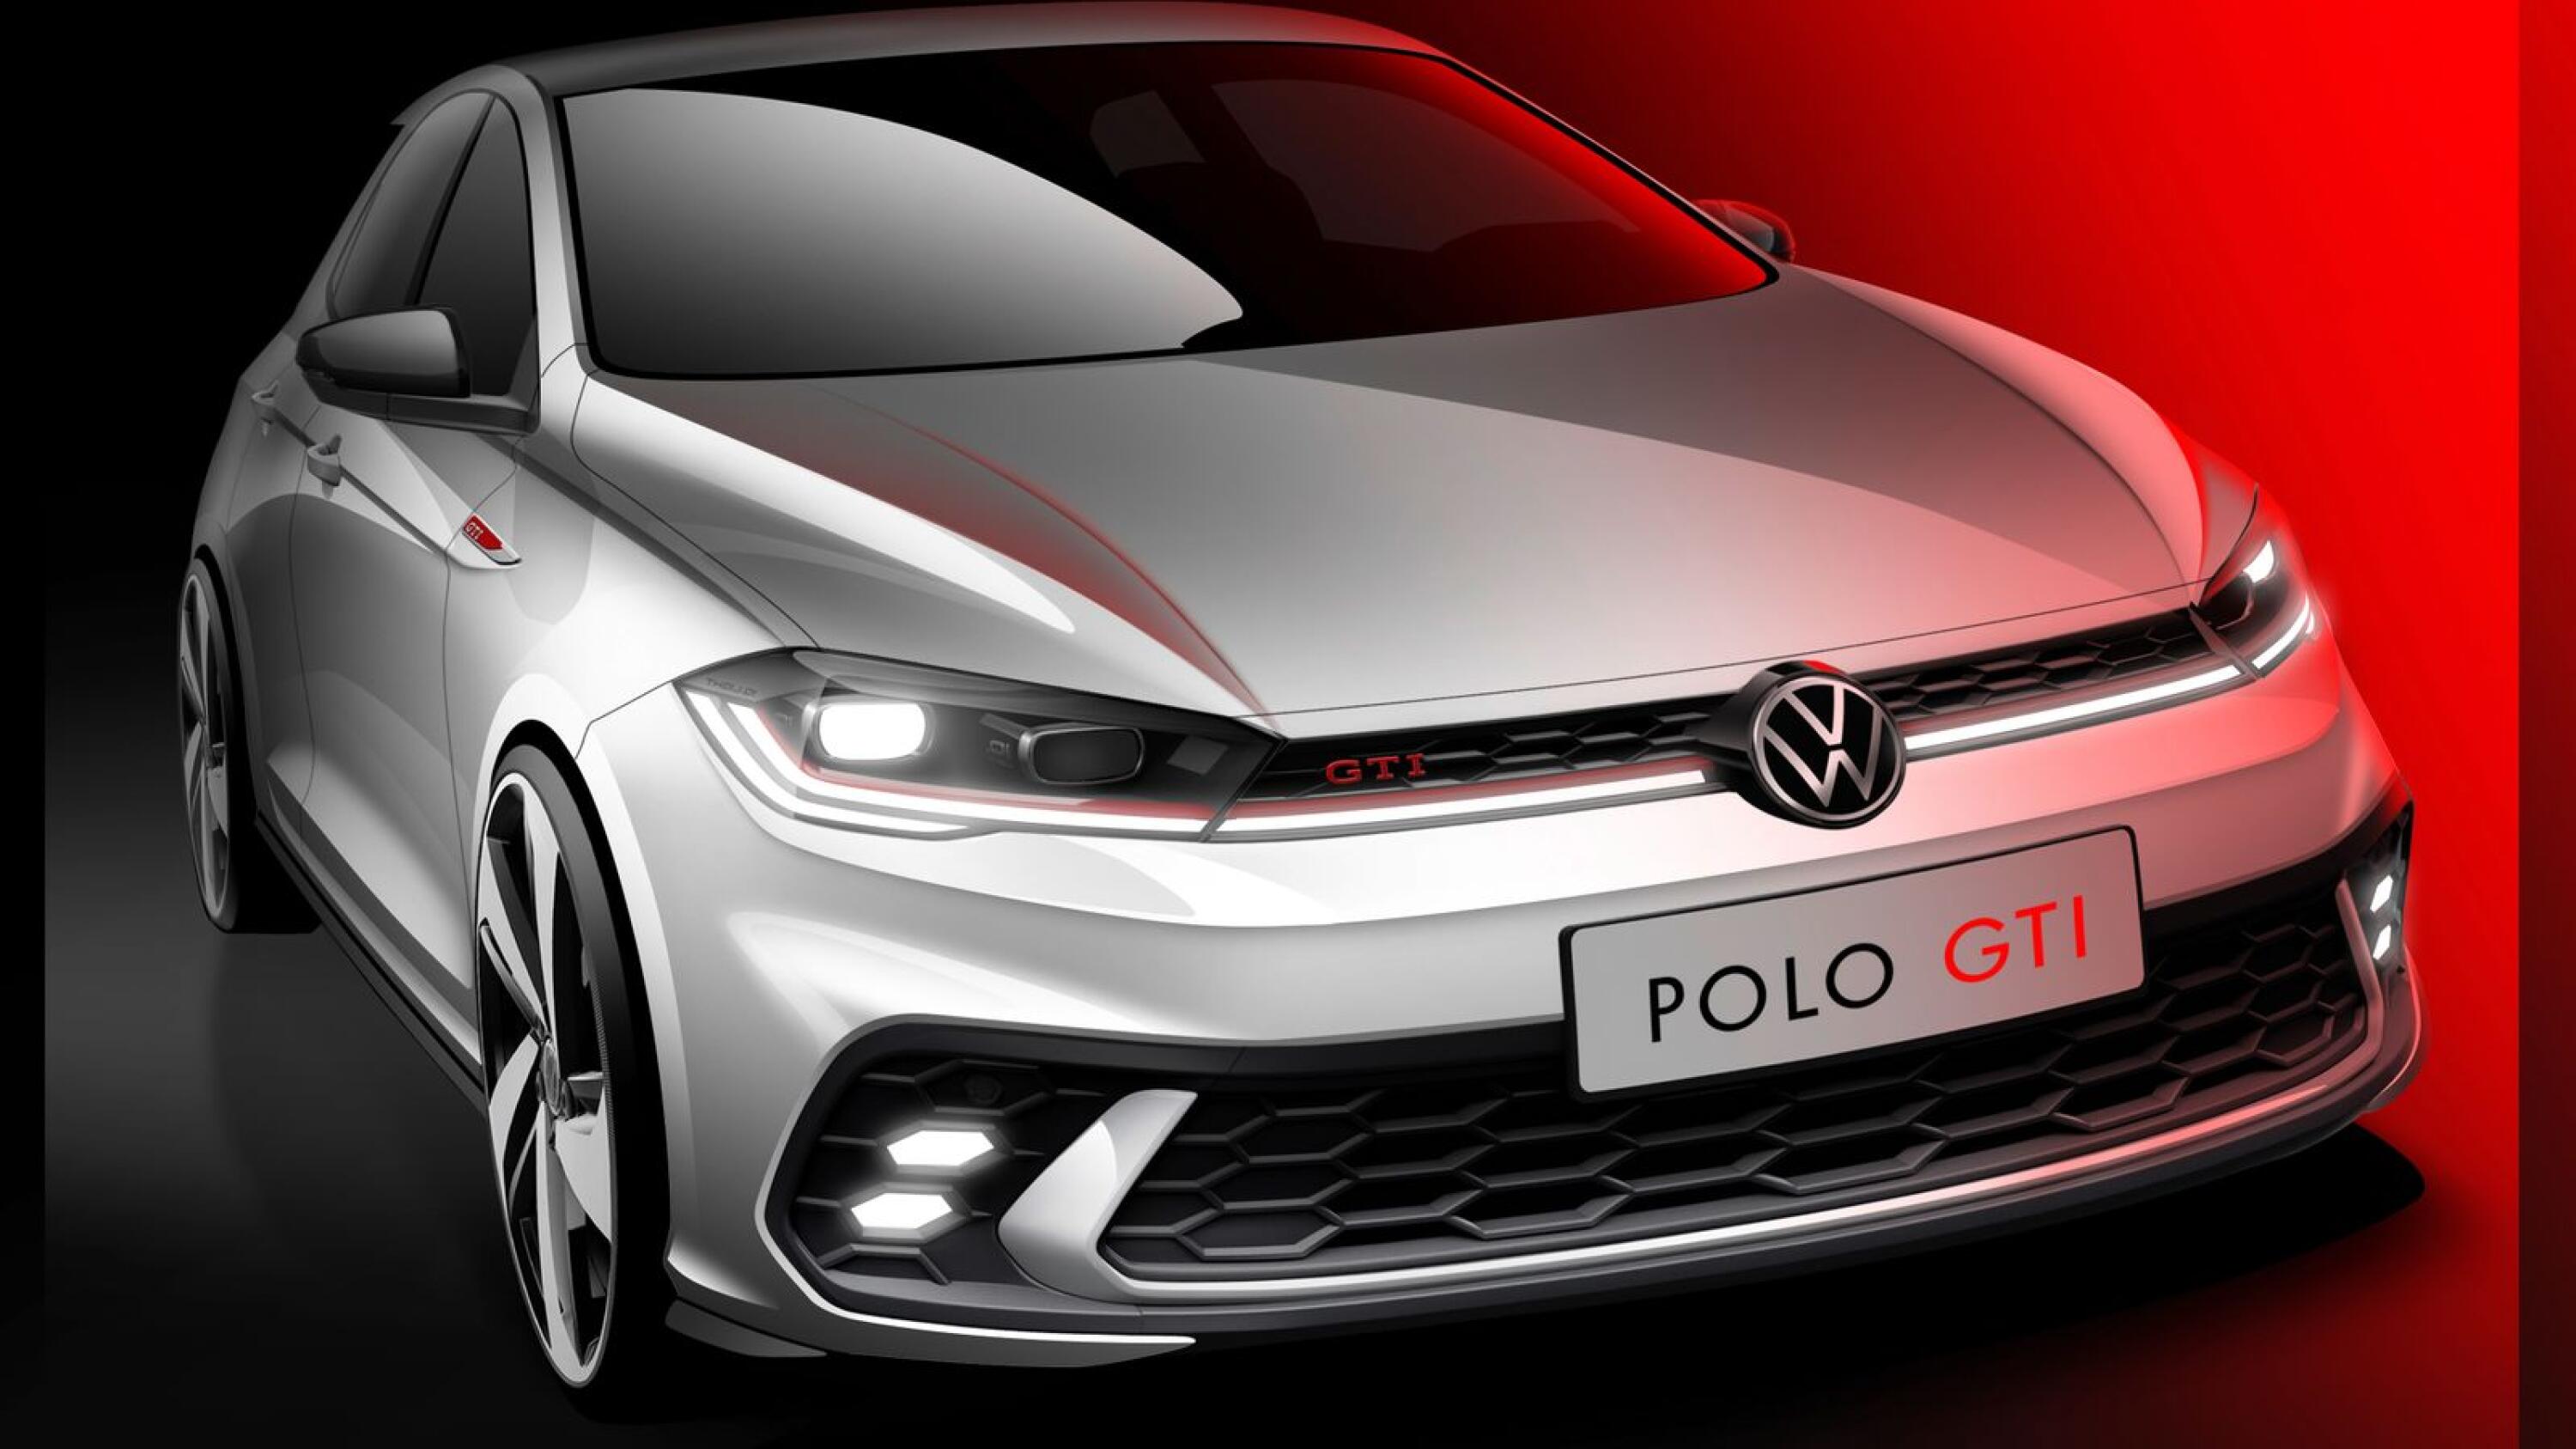 This is what the 2022 Volkswagen Polo GTI looks like